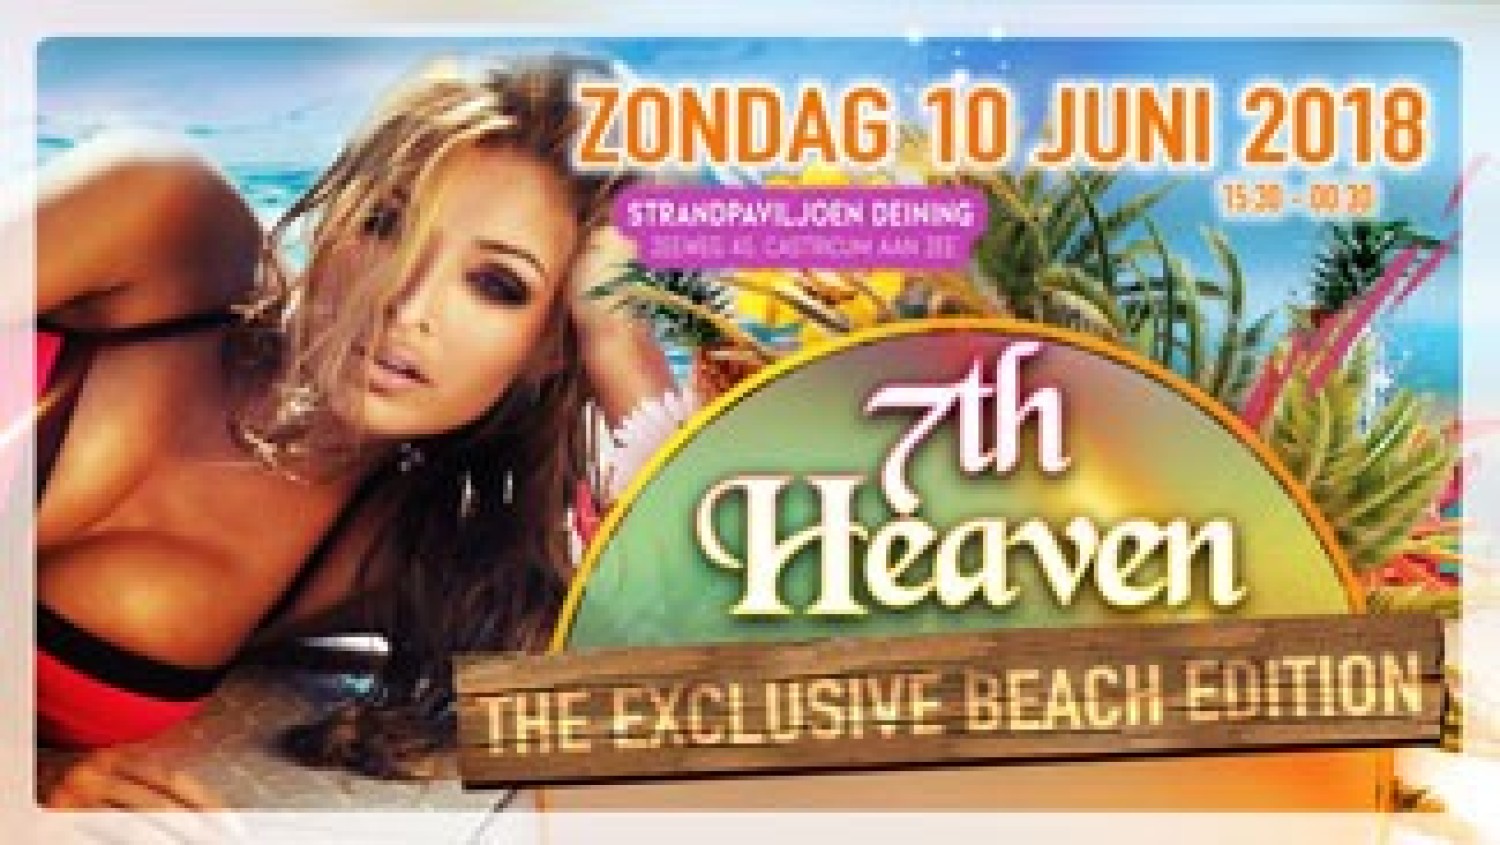 Party nieuws: 7th Heaven 'The Exclusive Beach Edition' is terug